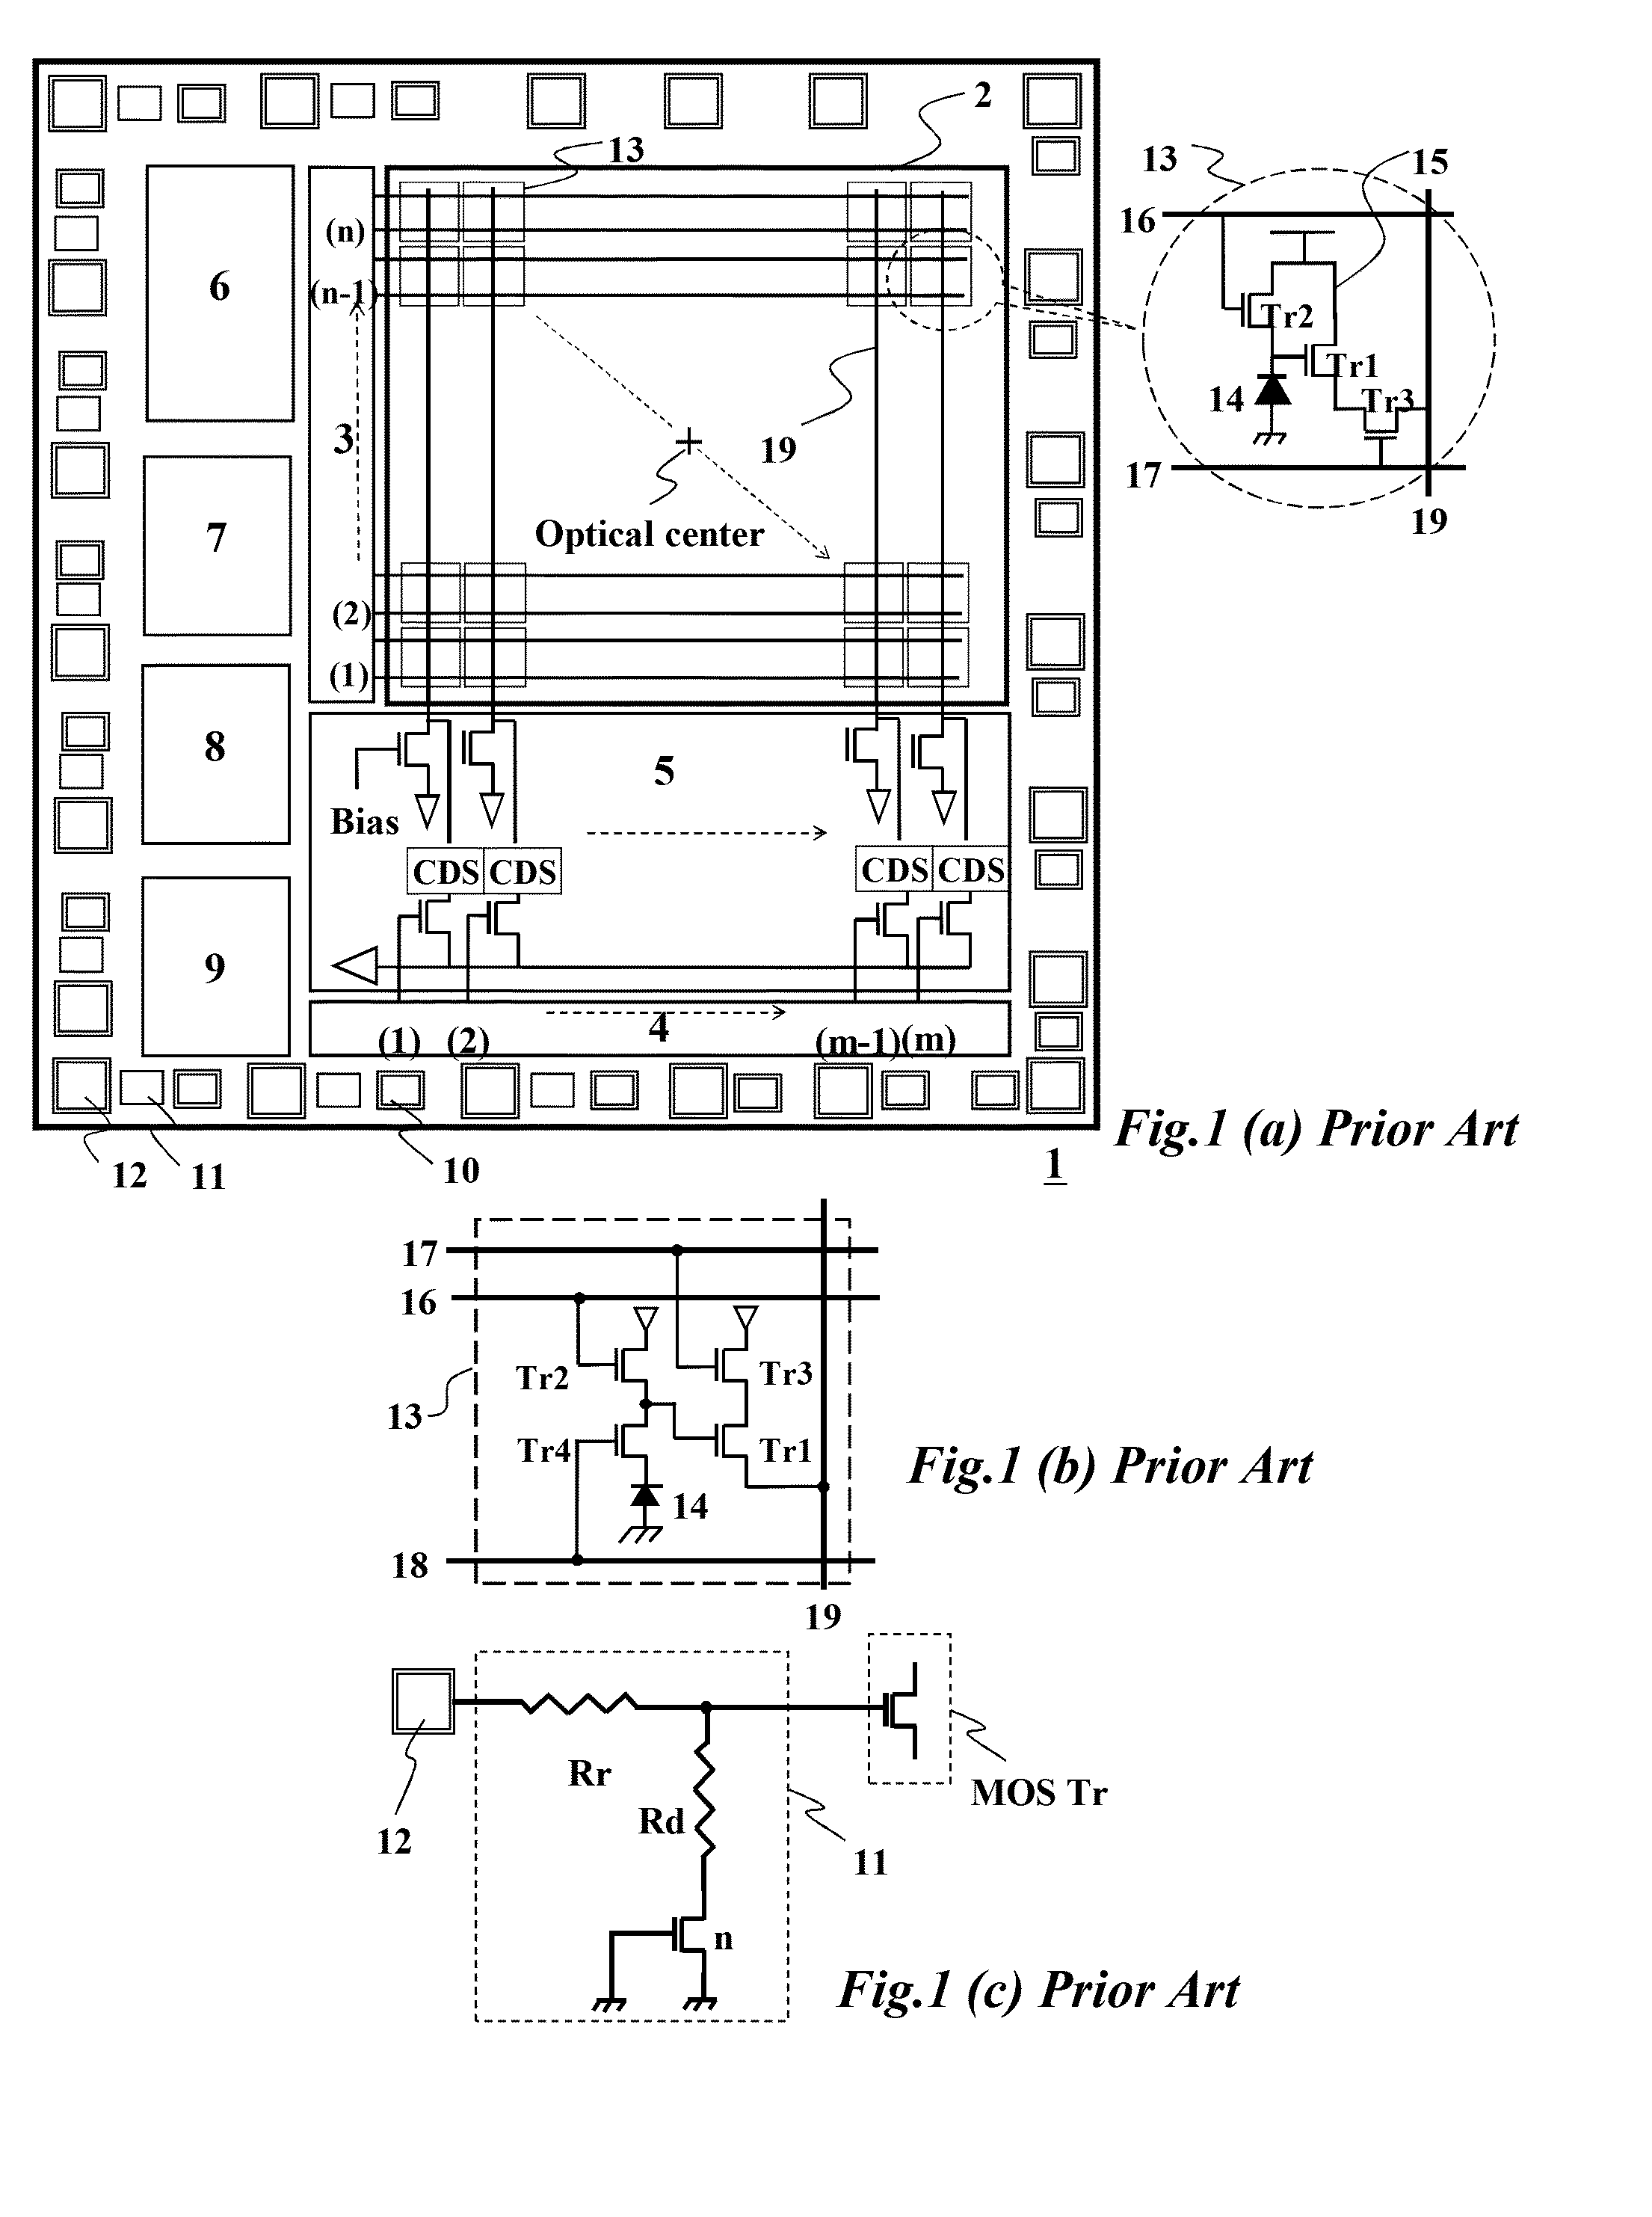 Solid-state image sensor, manufacturing method thereof, and imaging apparatus including the same